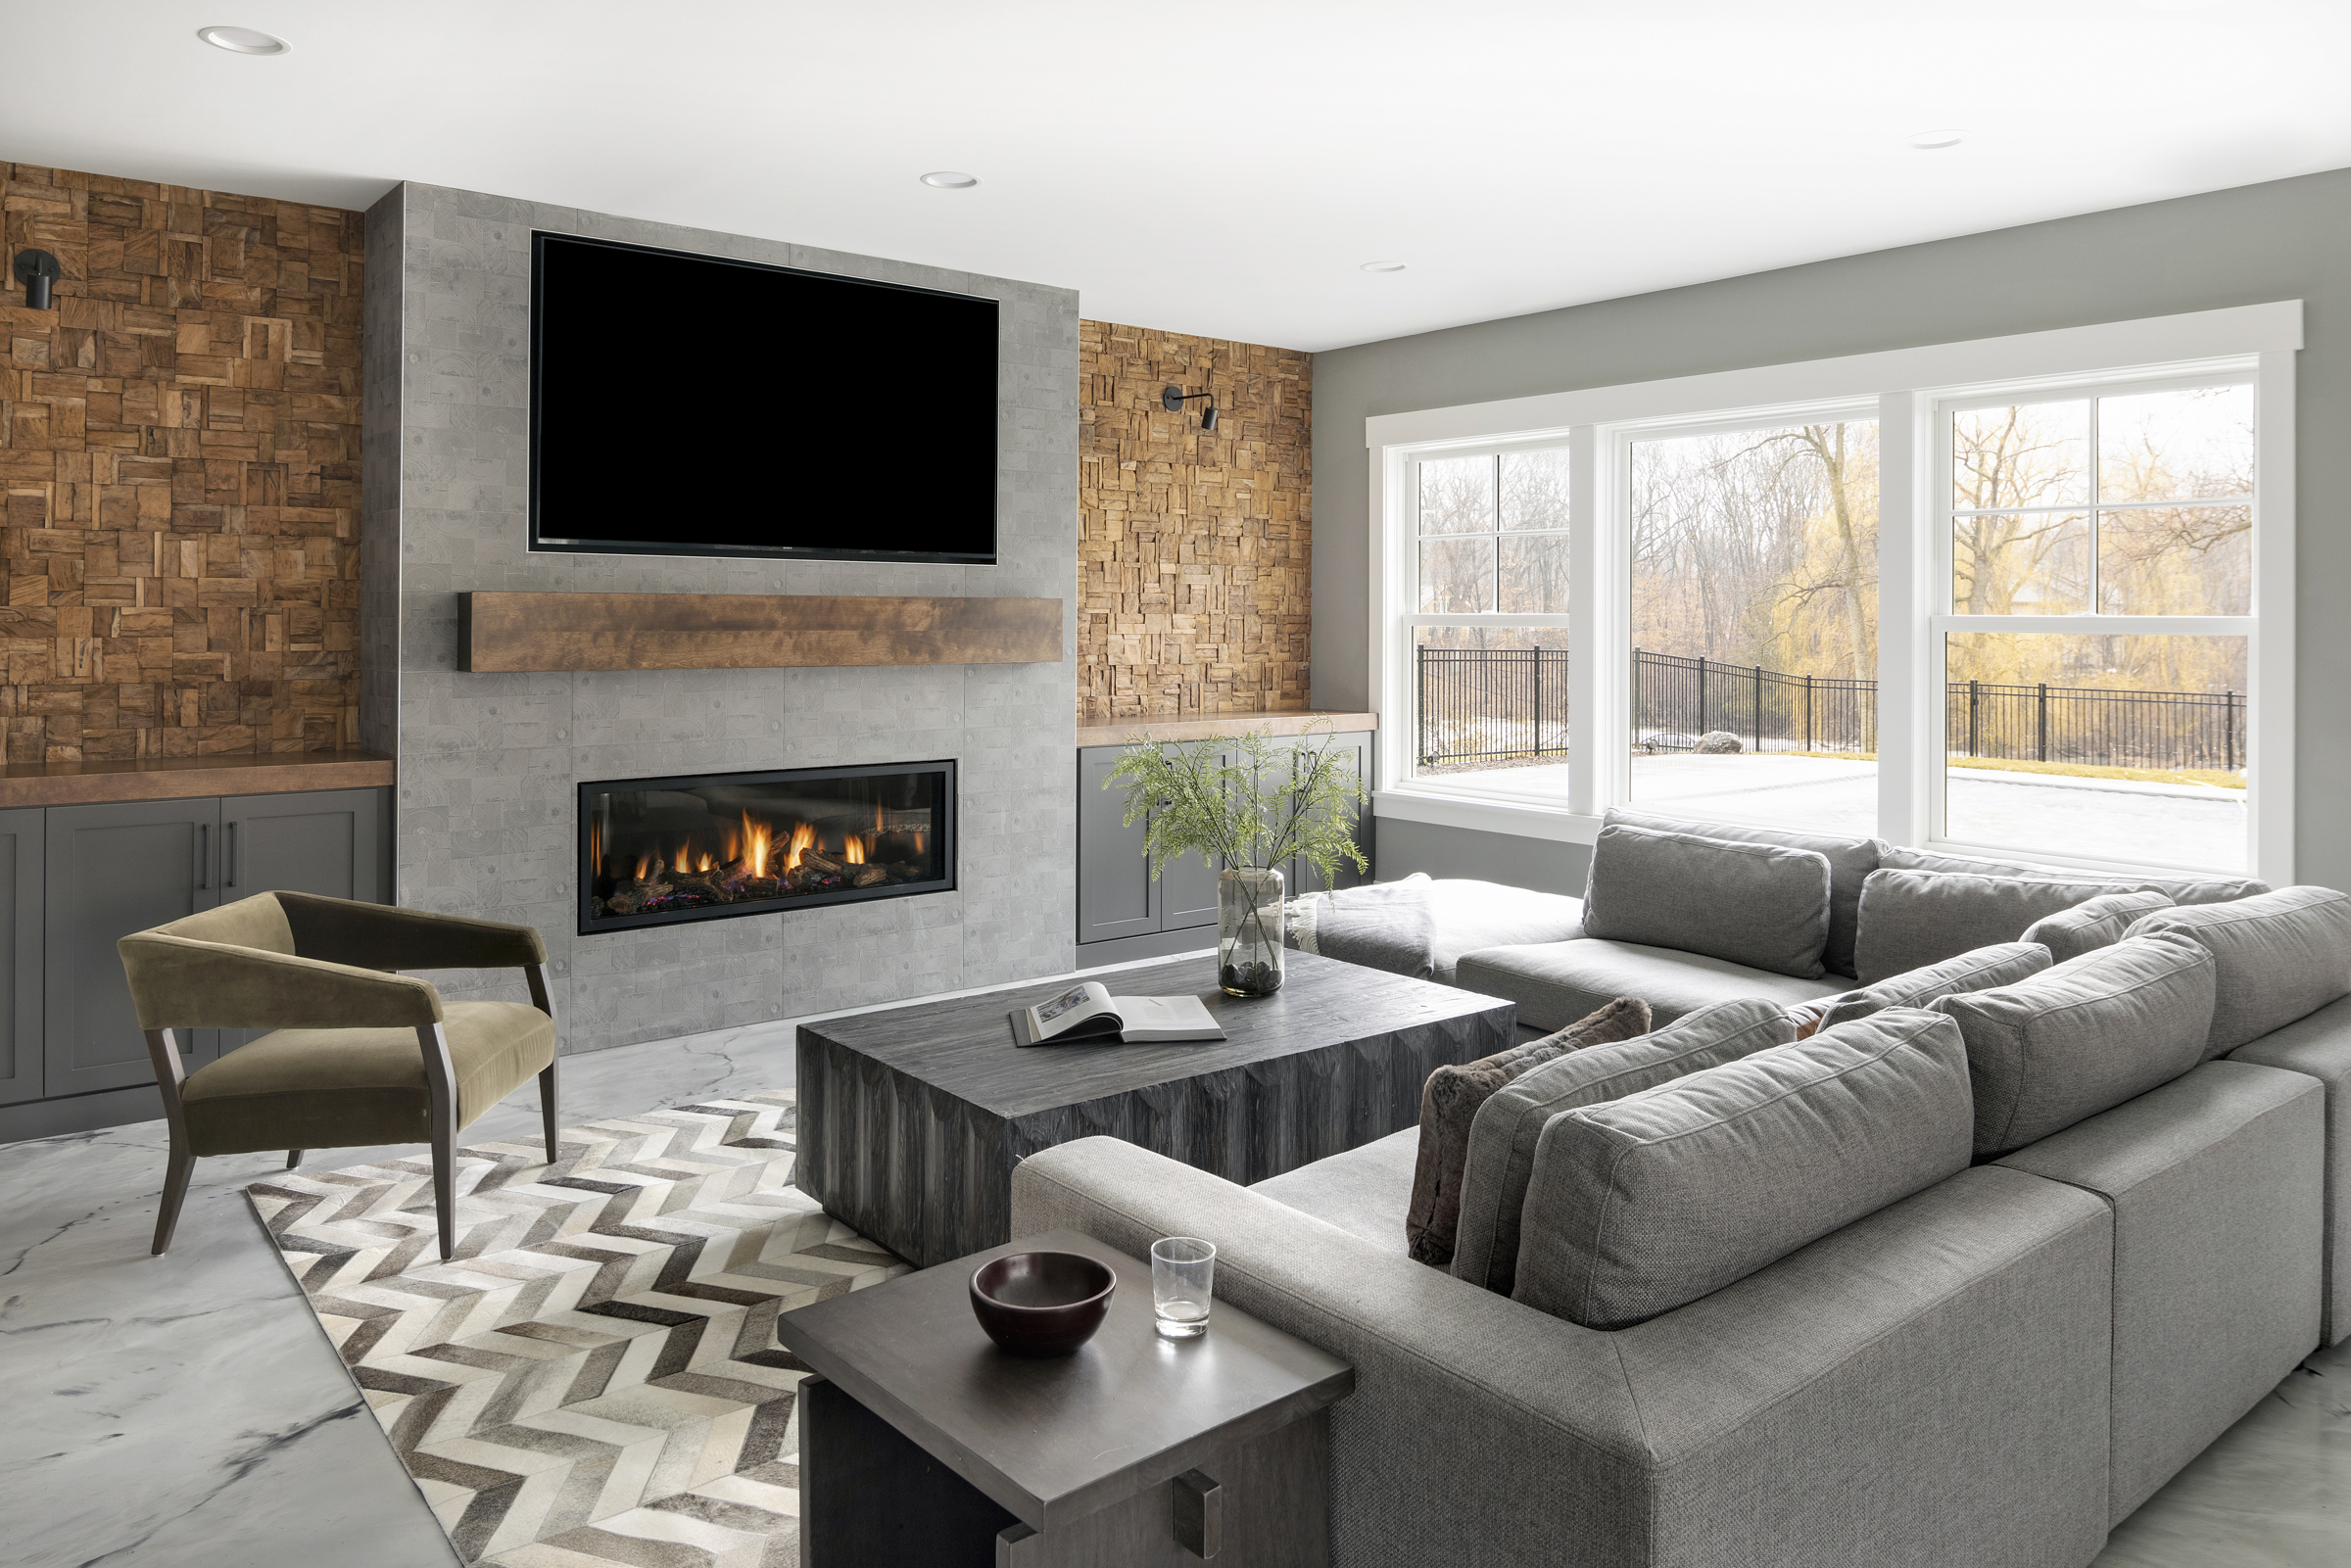 lower level living room with custom hand carved wood accent wall next to a custom stone fireplace surround with a reclaimed wood mantle, a grey sectional couch, a coffee table, and a chevron rug in the middle of the room